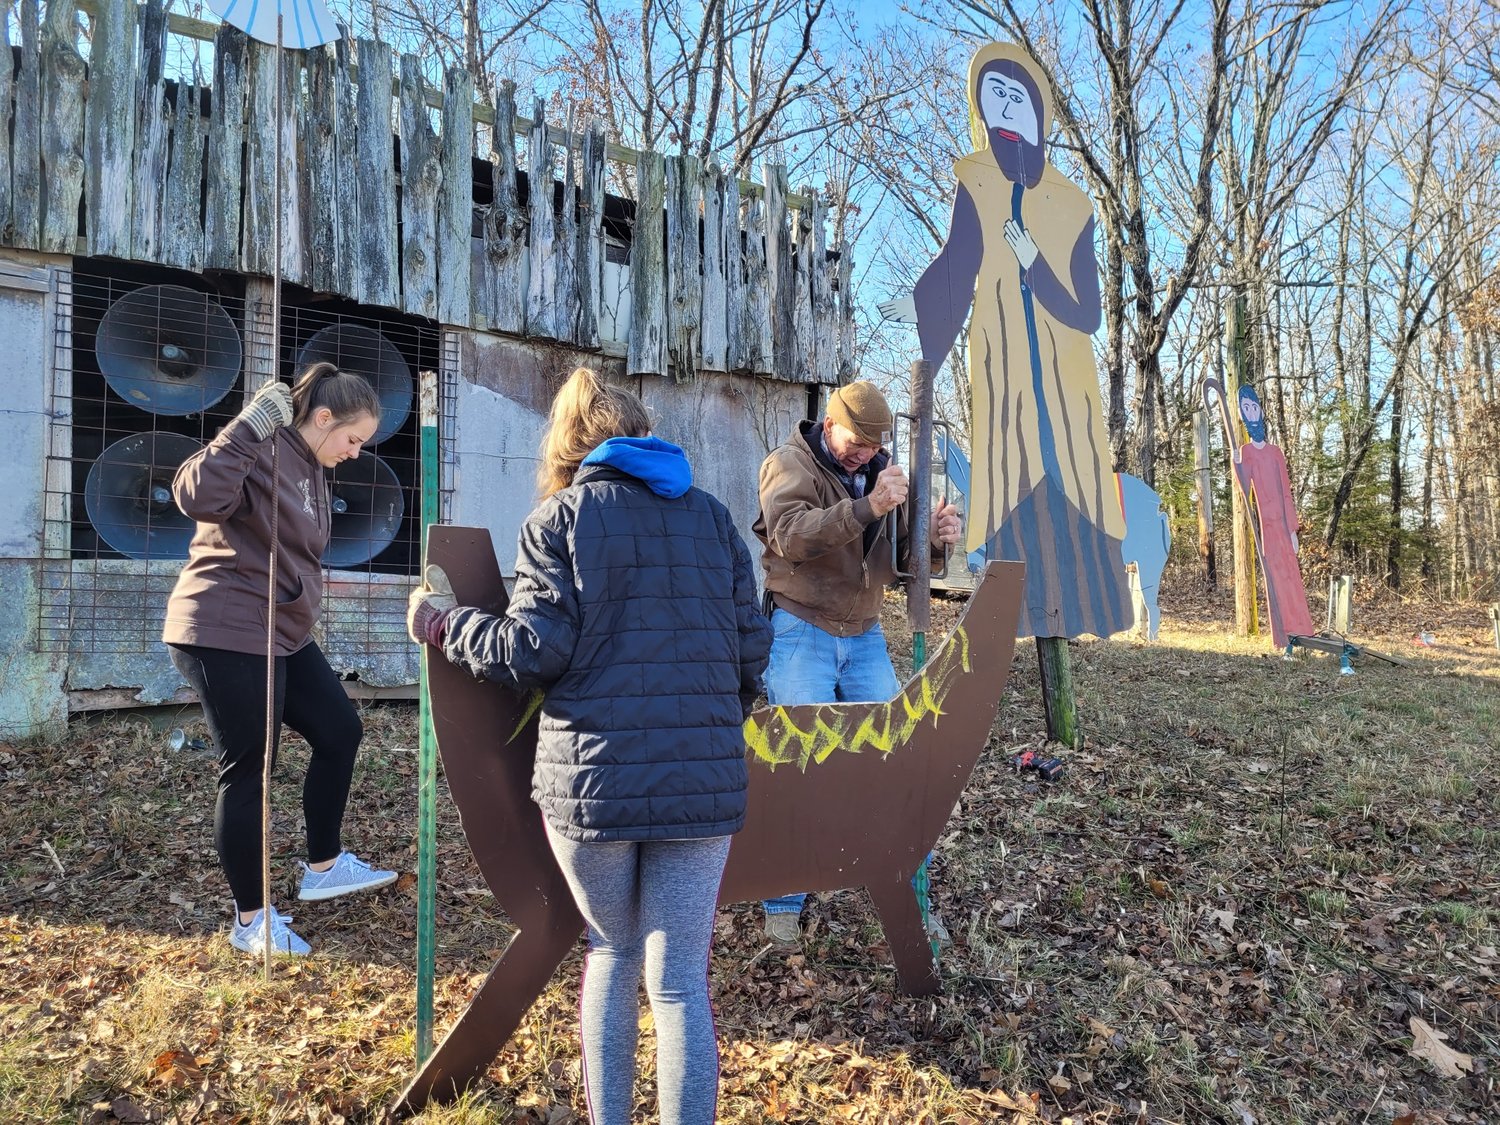 Meta residents place the manger in the center of the hilltop Nativity scene on Dec. 3.